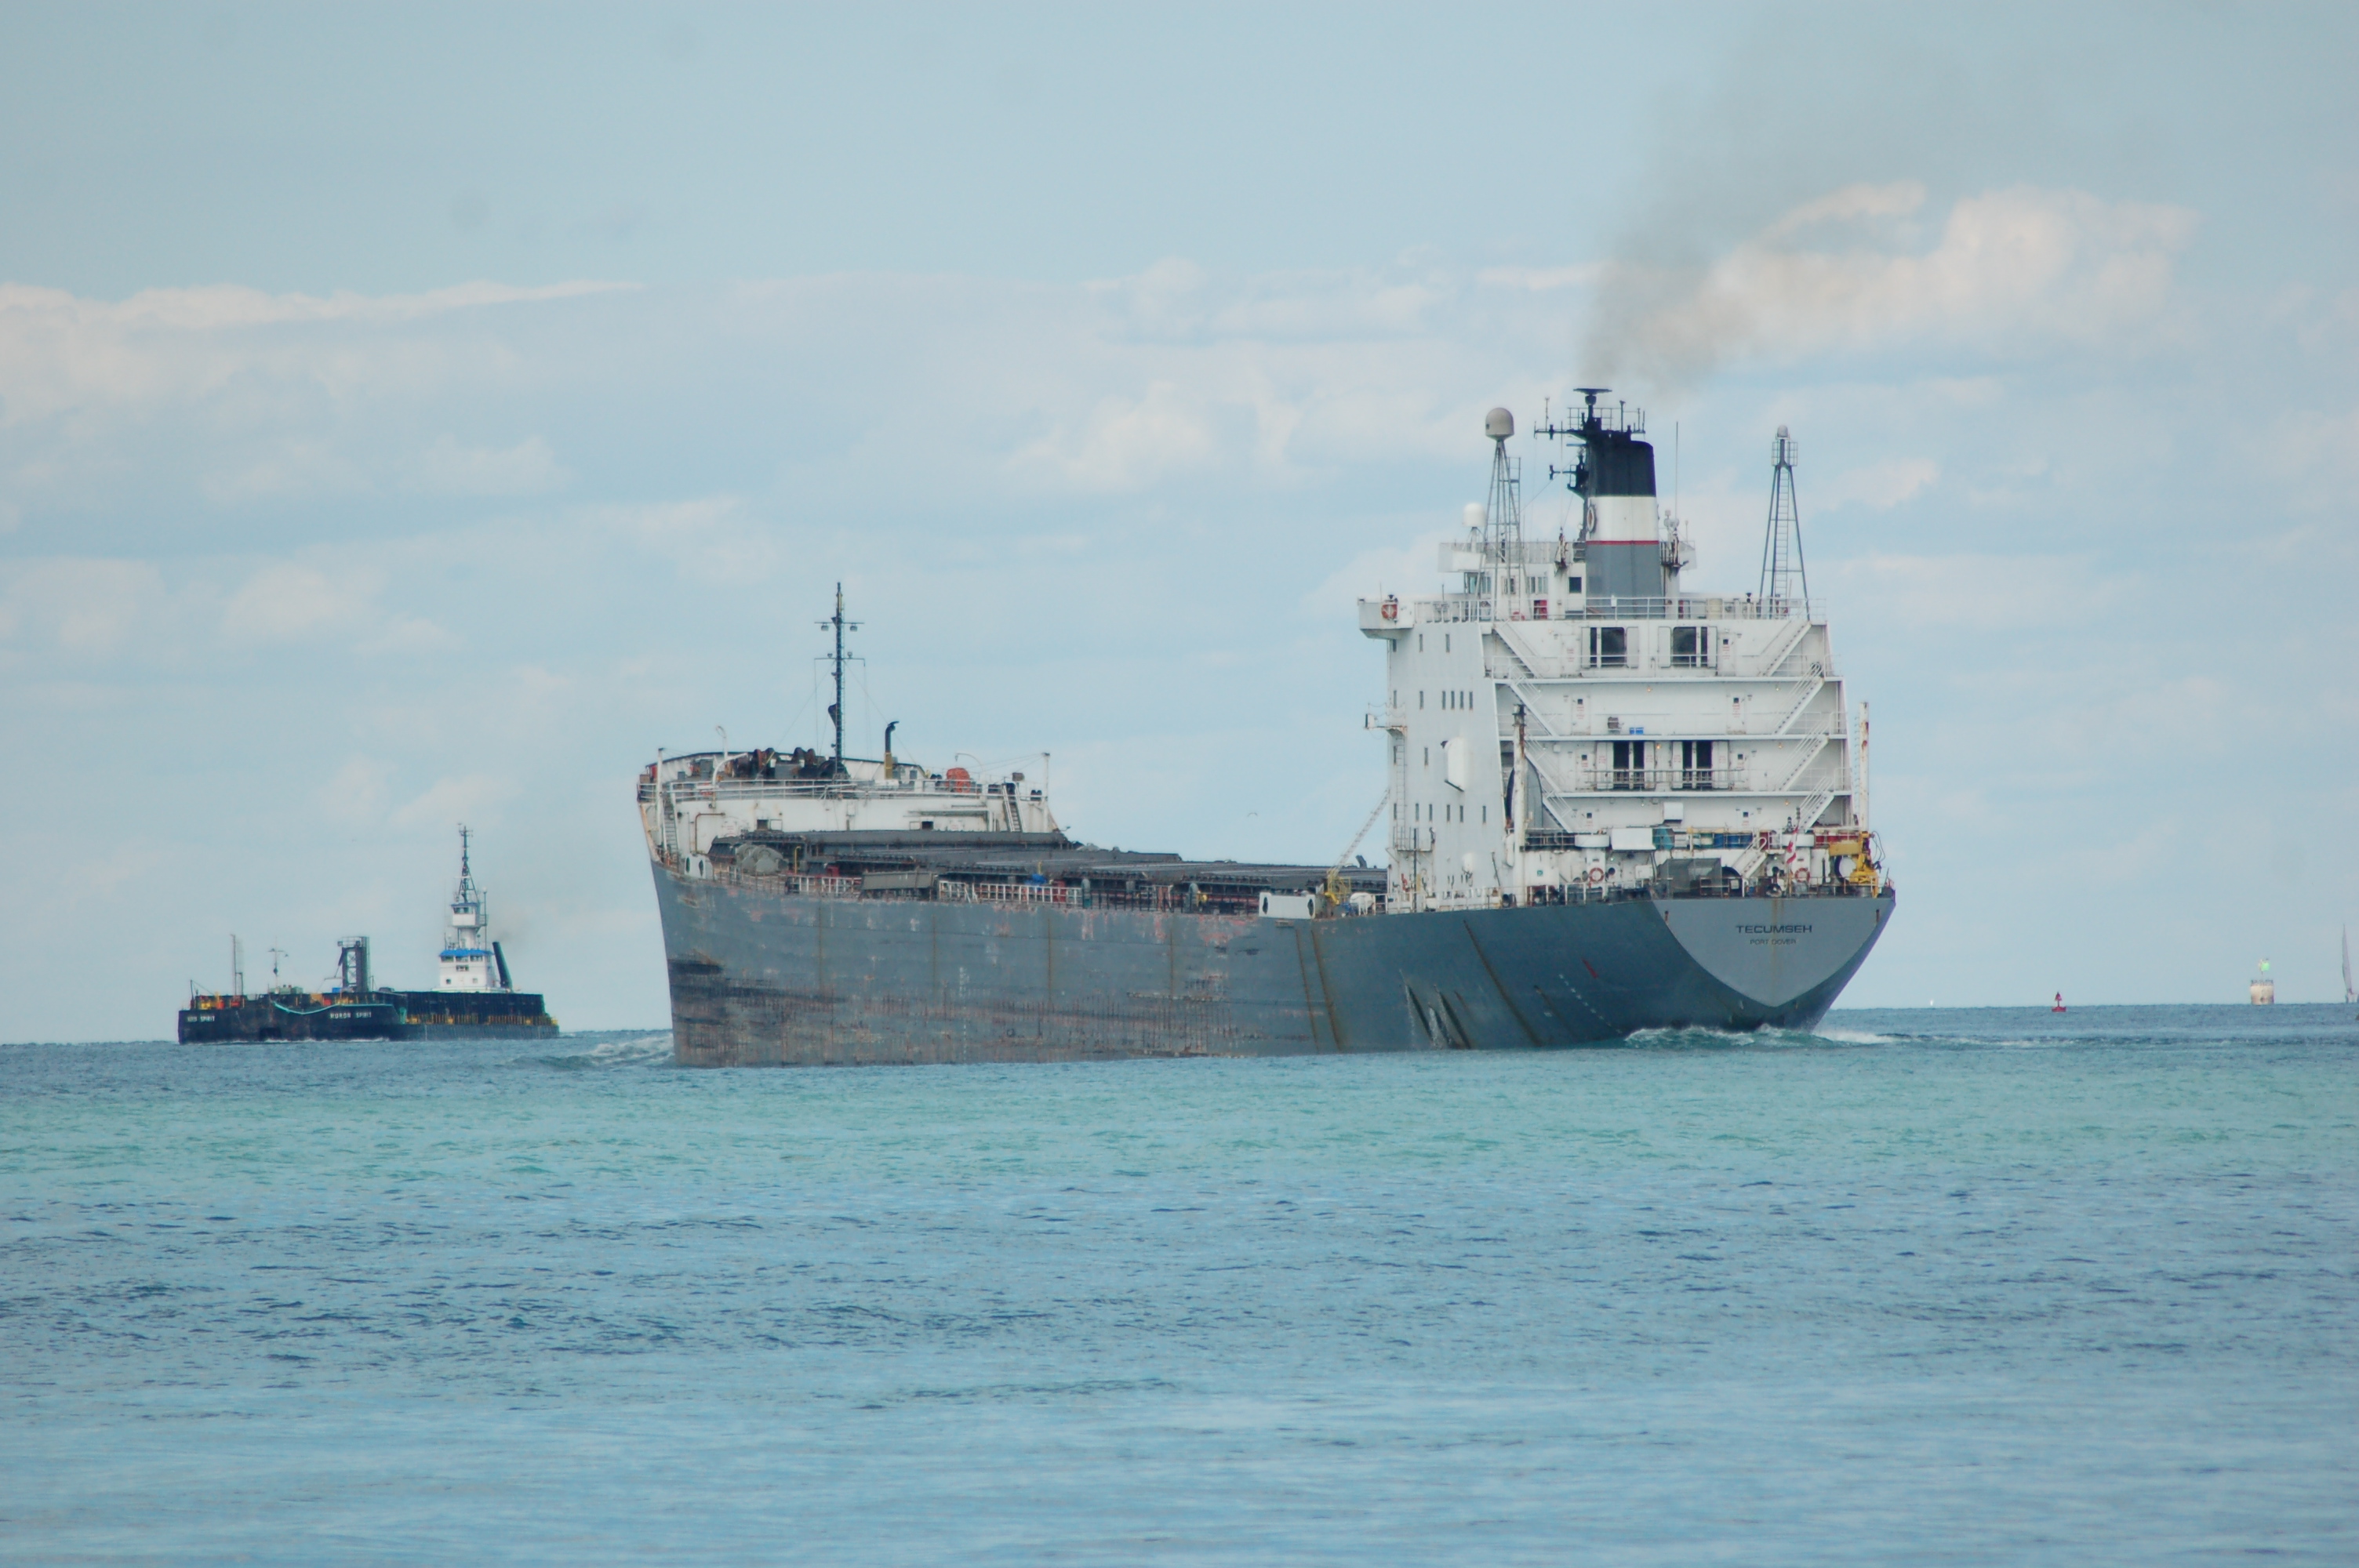 Tecumseh (Lower Lakes Towing) upbound in the Detroit River